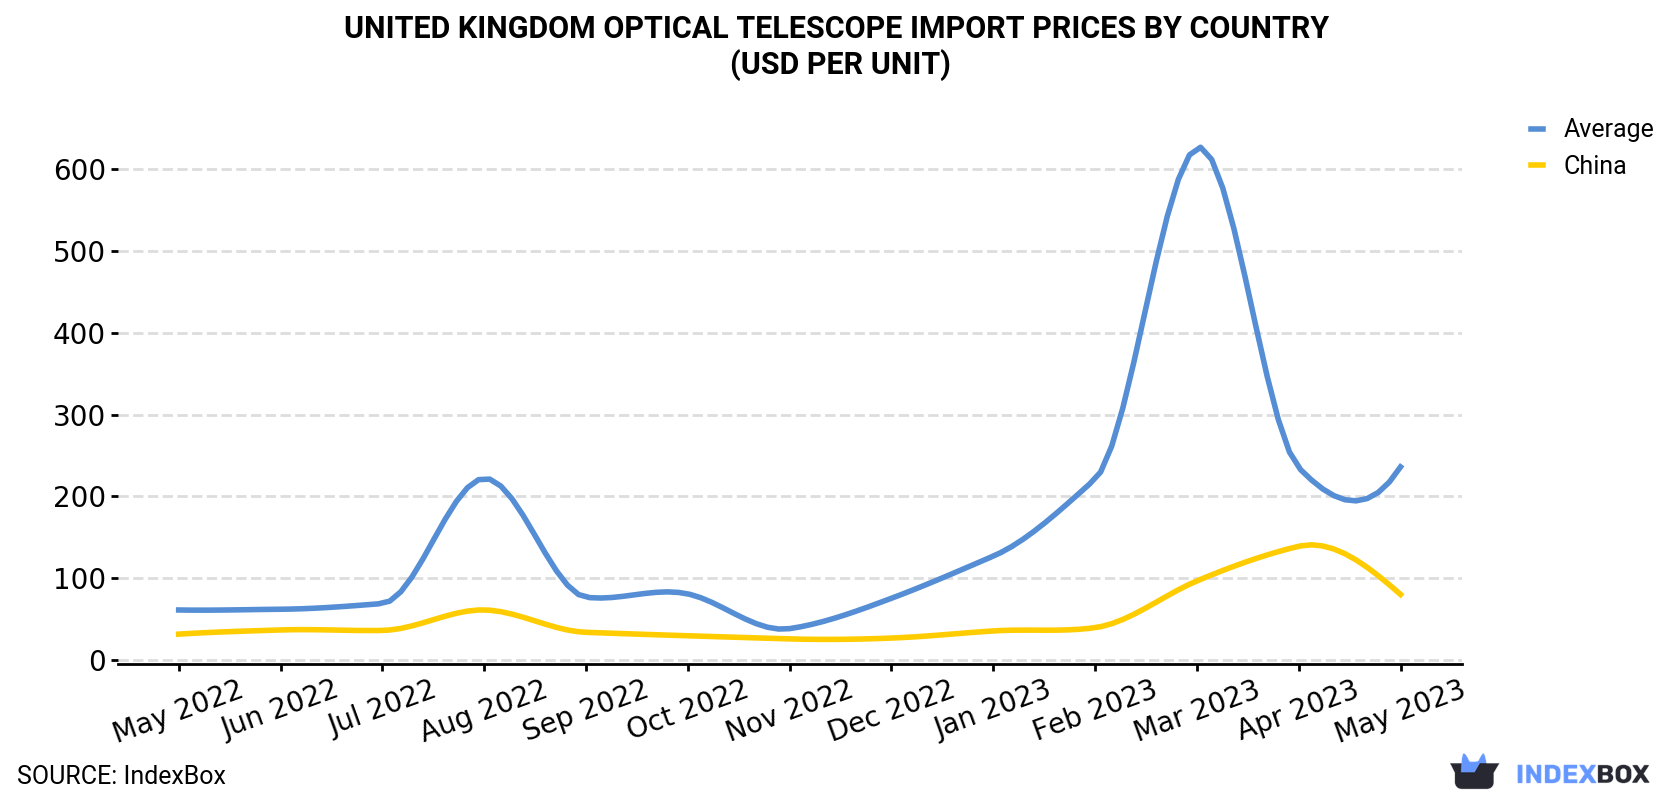 United Kingdom Optical Telescope Import Prices By Country (USD Per Unit)